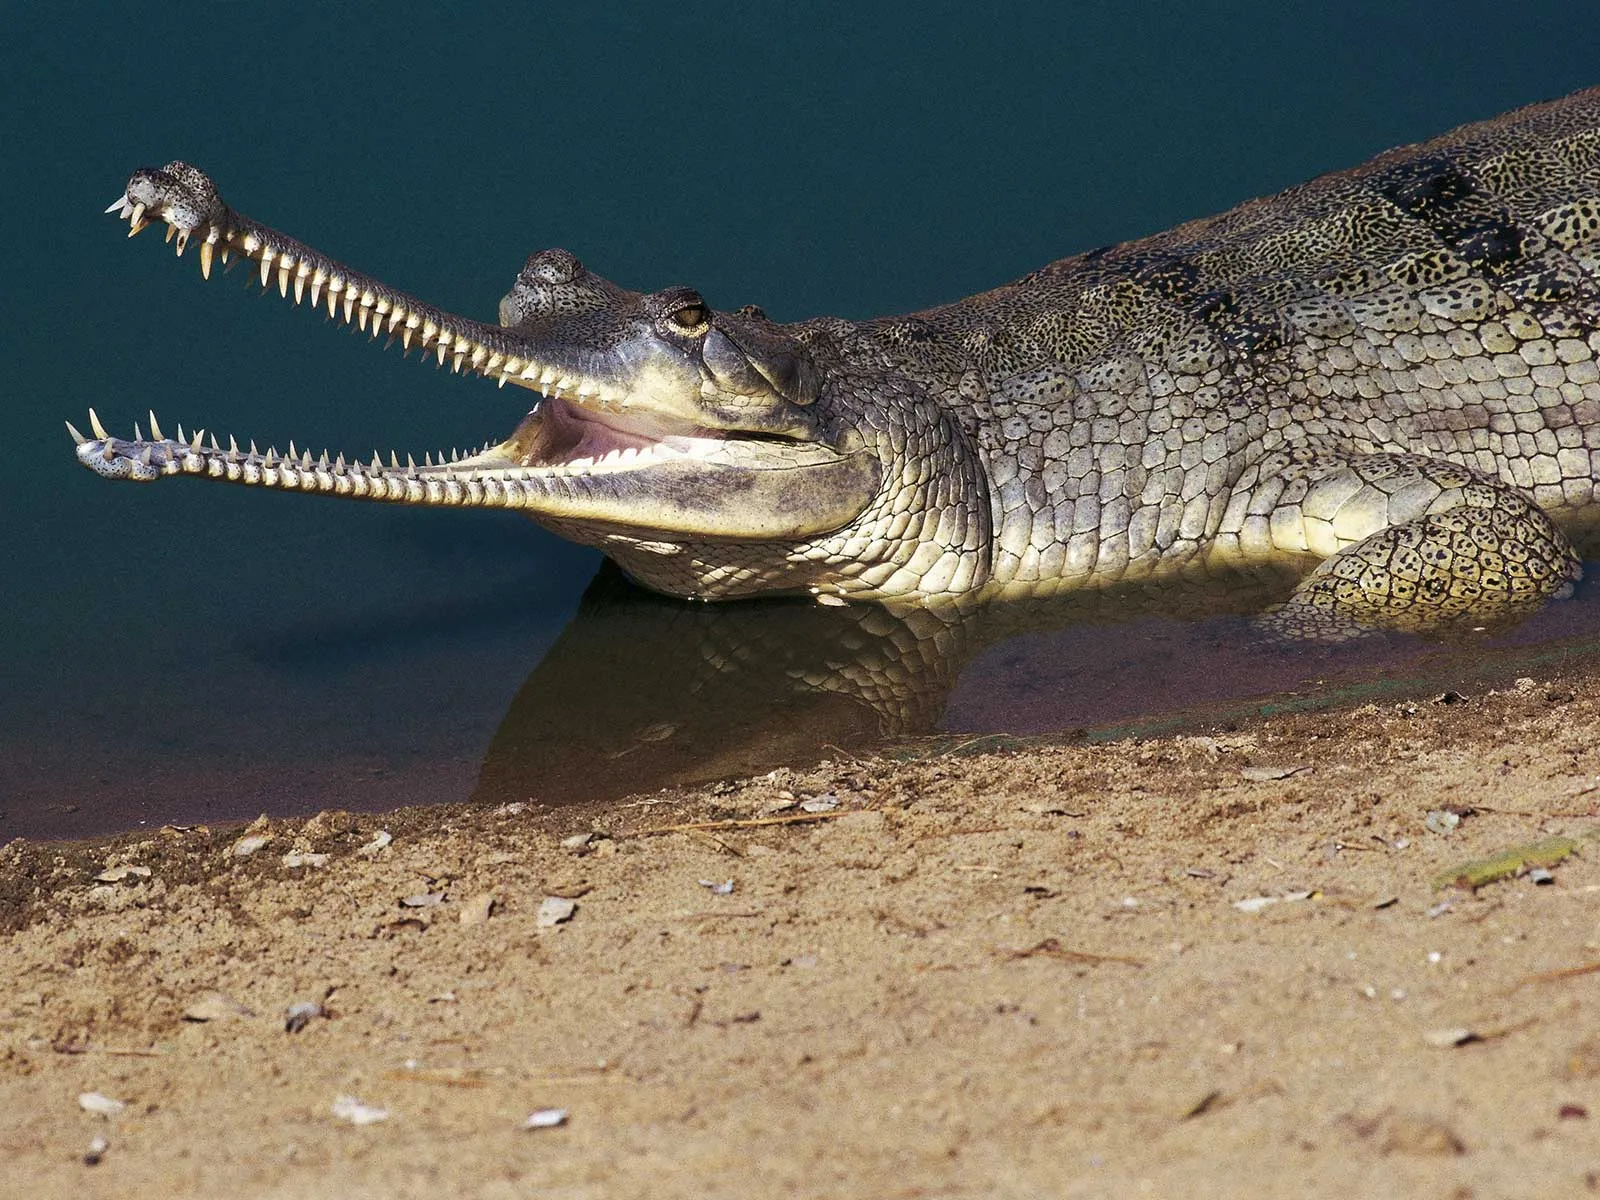 Modern Crocodiles Are Evolving at a Rapid Rate | Science| Smithsonian  Magazine